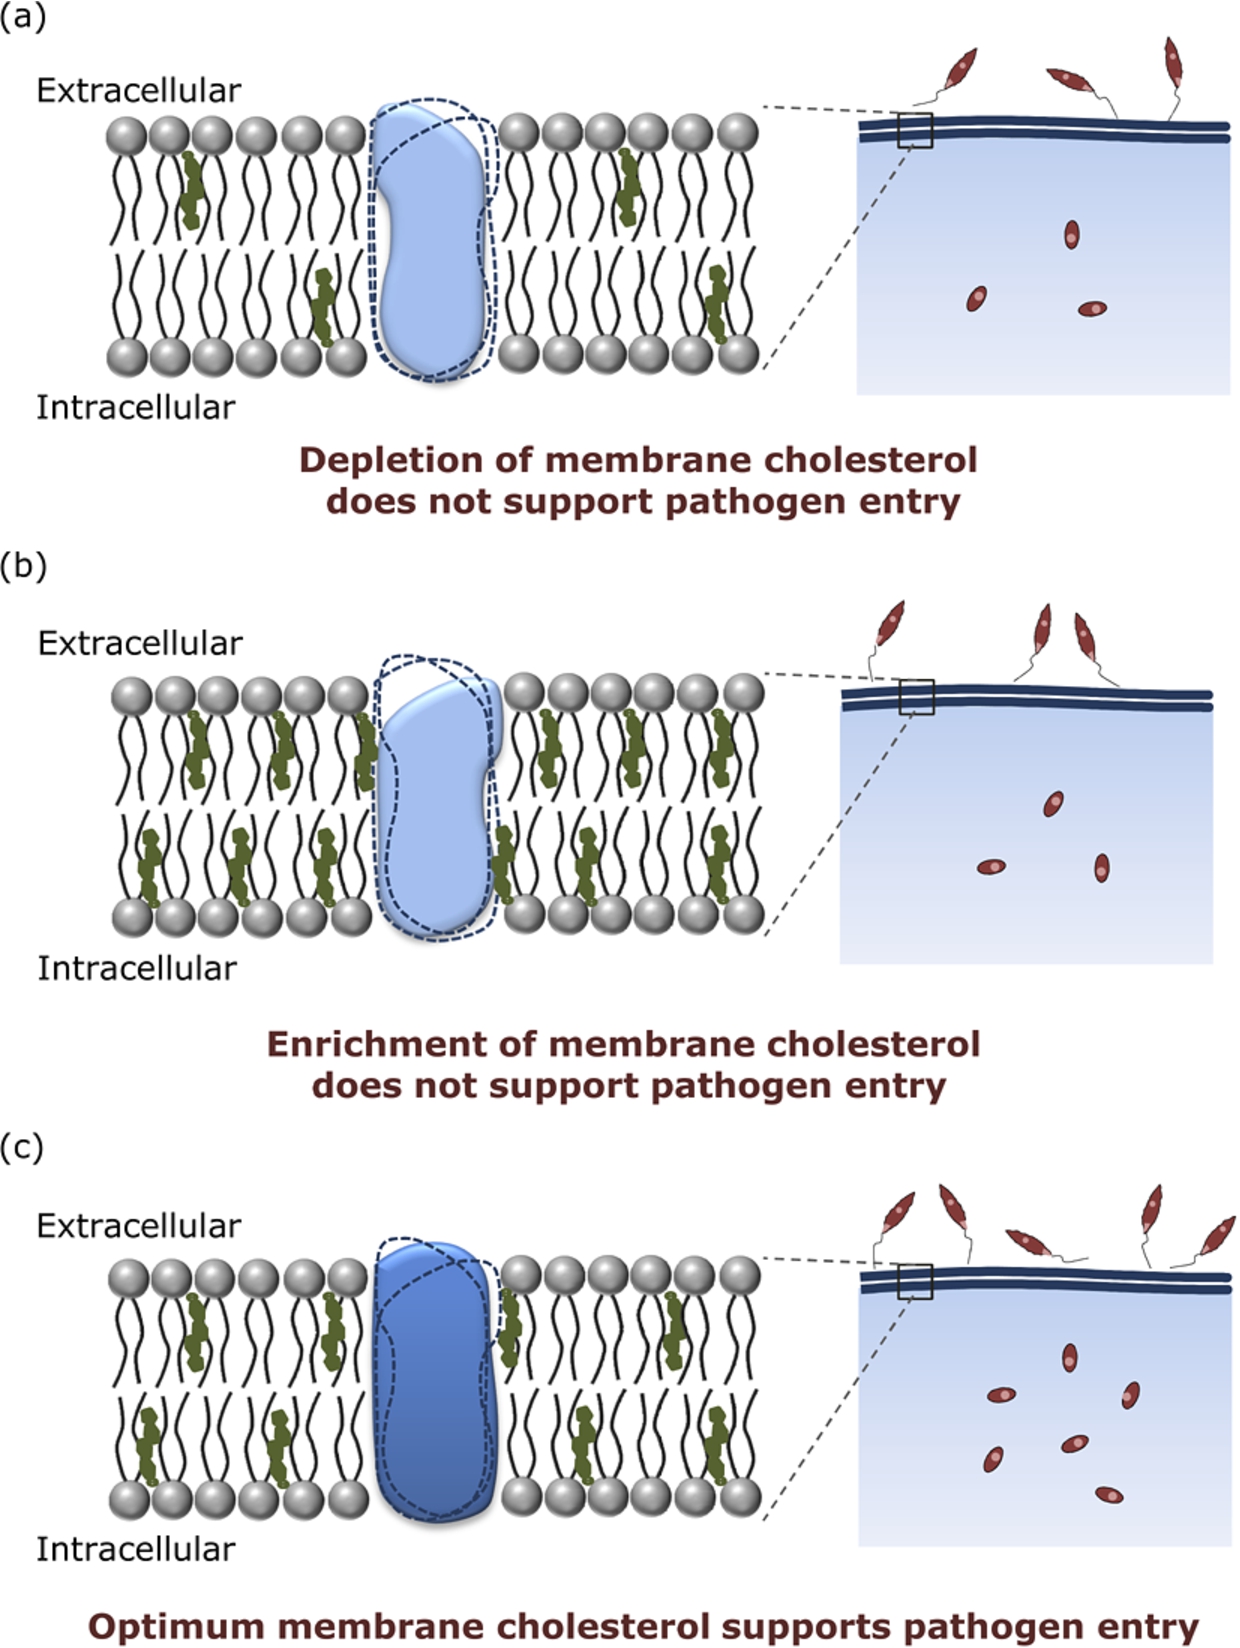 Regulation of pathogen entry by host membrane cholesterol. Host membrane cholesterol modulates the entry of intracellular pathogens (such as Leishmania, as shown in the figure). Previous results from our laboratory have shown that (a) depletion as well as (b) enrichment of membrane cholesterol in host cells results in reduced pathogen entry, while (c) an optimum level of host membrane cholesterol is required for efficient pathogen entry. We propose that such a cholesterol-mediated entry of intracellular pathogens could be due to the interaction of membrane cholesterol with host cell surface receptors implicated in pathogen entry. Receptor conformations stabilized in the membranes of varying cholesterol content are rendered in solid shapes, while dotted outlines depict other unfavorable conformations. Optimum cholesterol levels in host cells could support receptor conformation(s) that enable efficient pathogen entry. On the other hand, depletion or enrichment of host membrane cholesterol could render receptor conformation(s) that do not support the entry of intracellular pathogens.